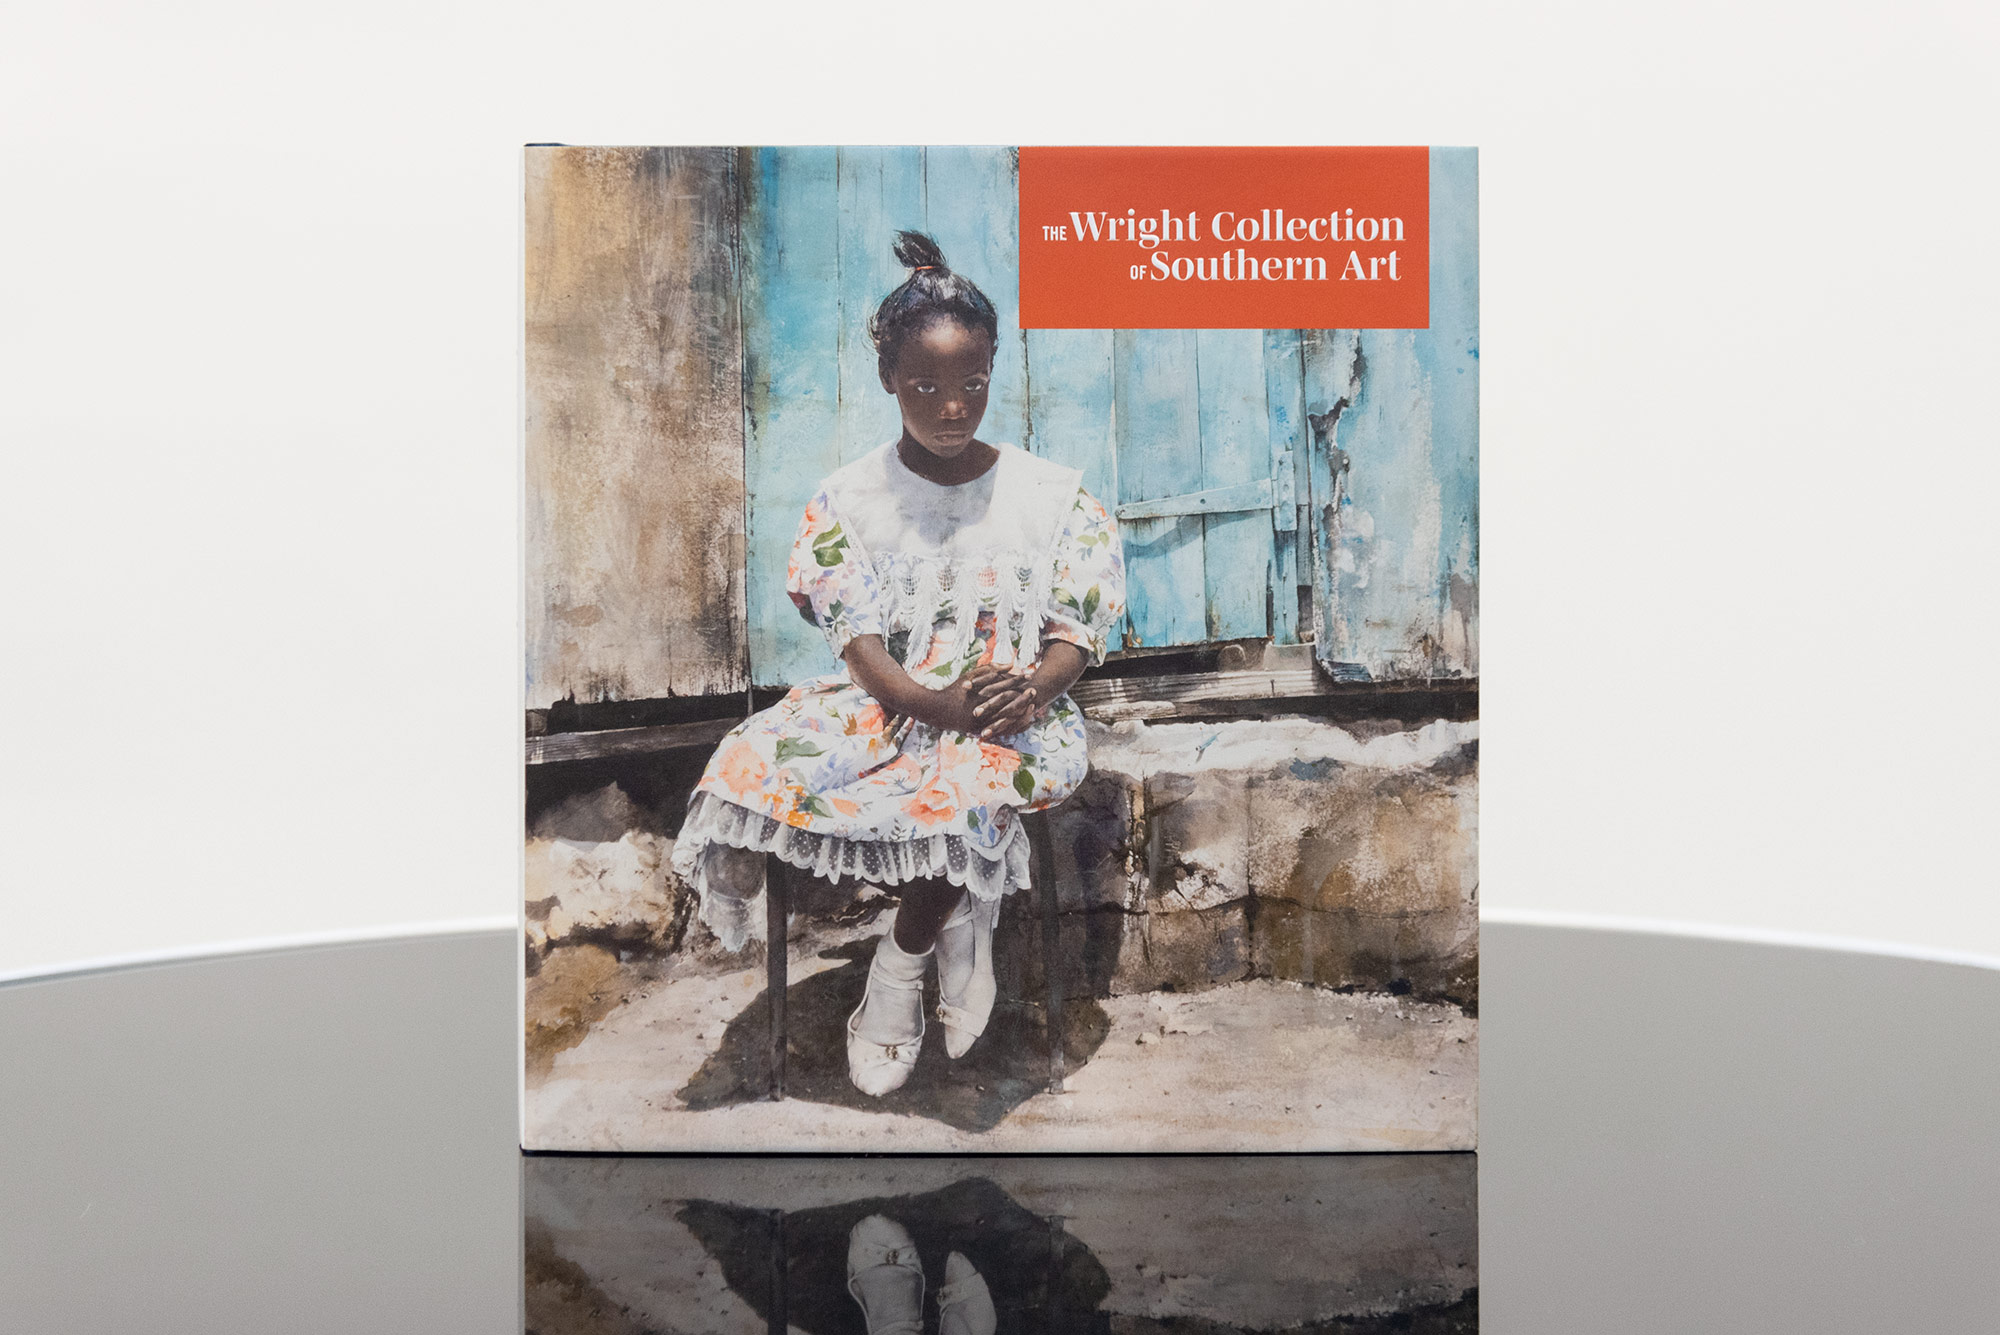 The Wright Collection of Southern Art book